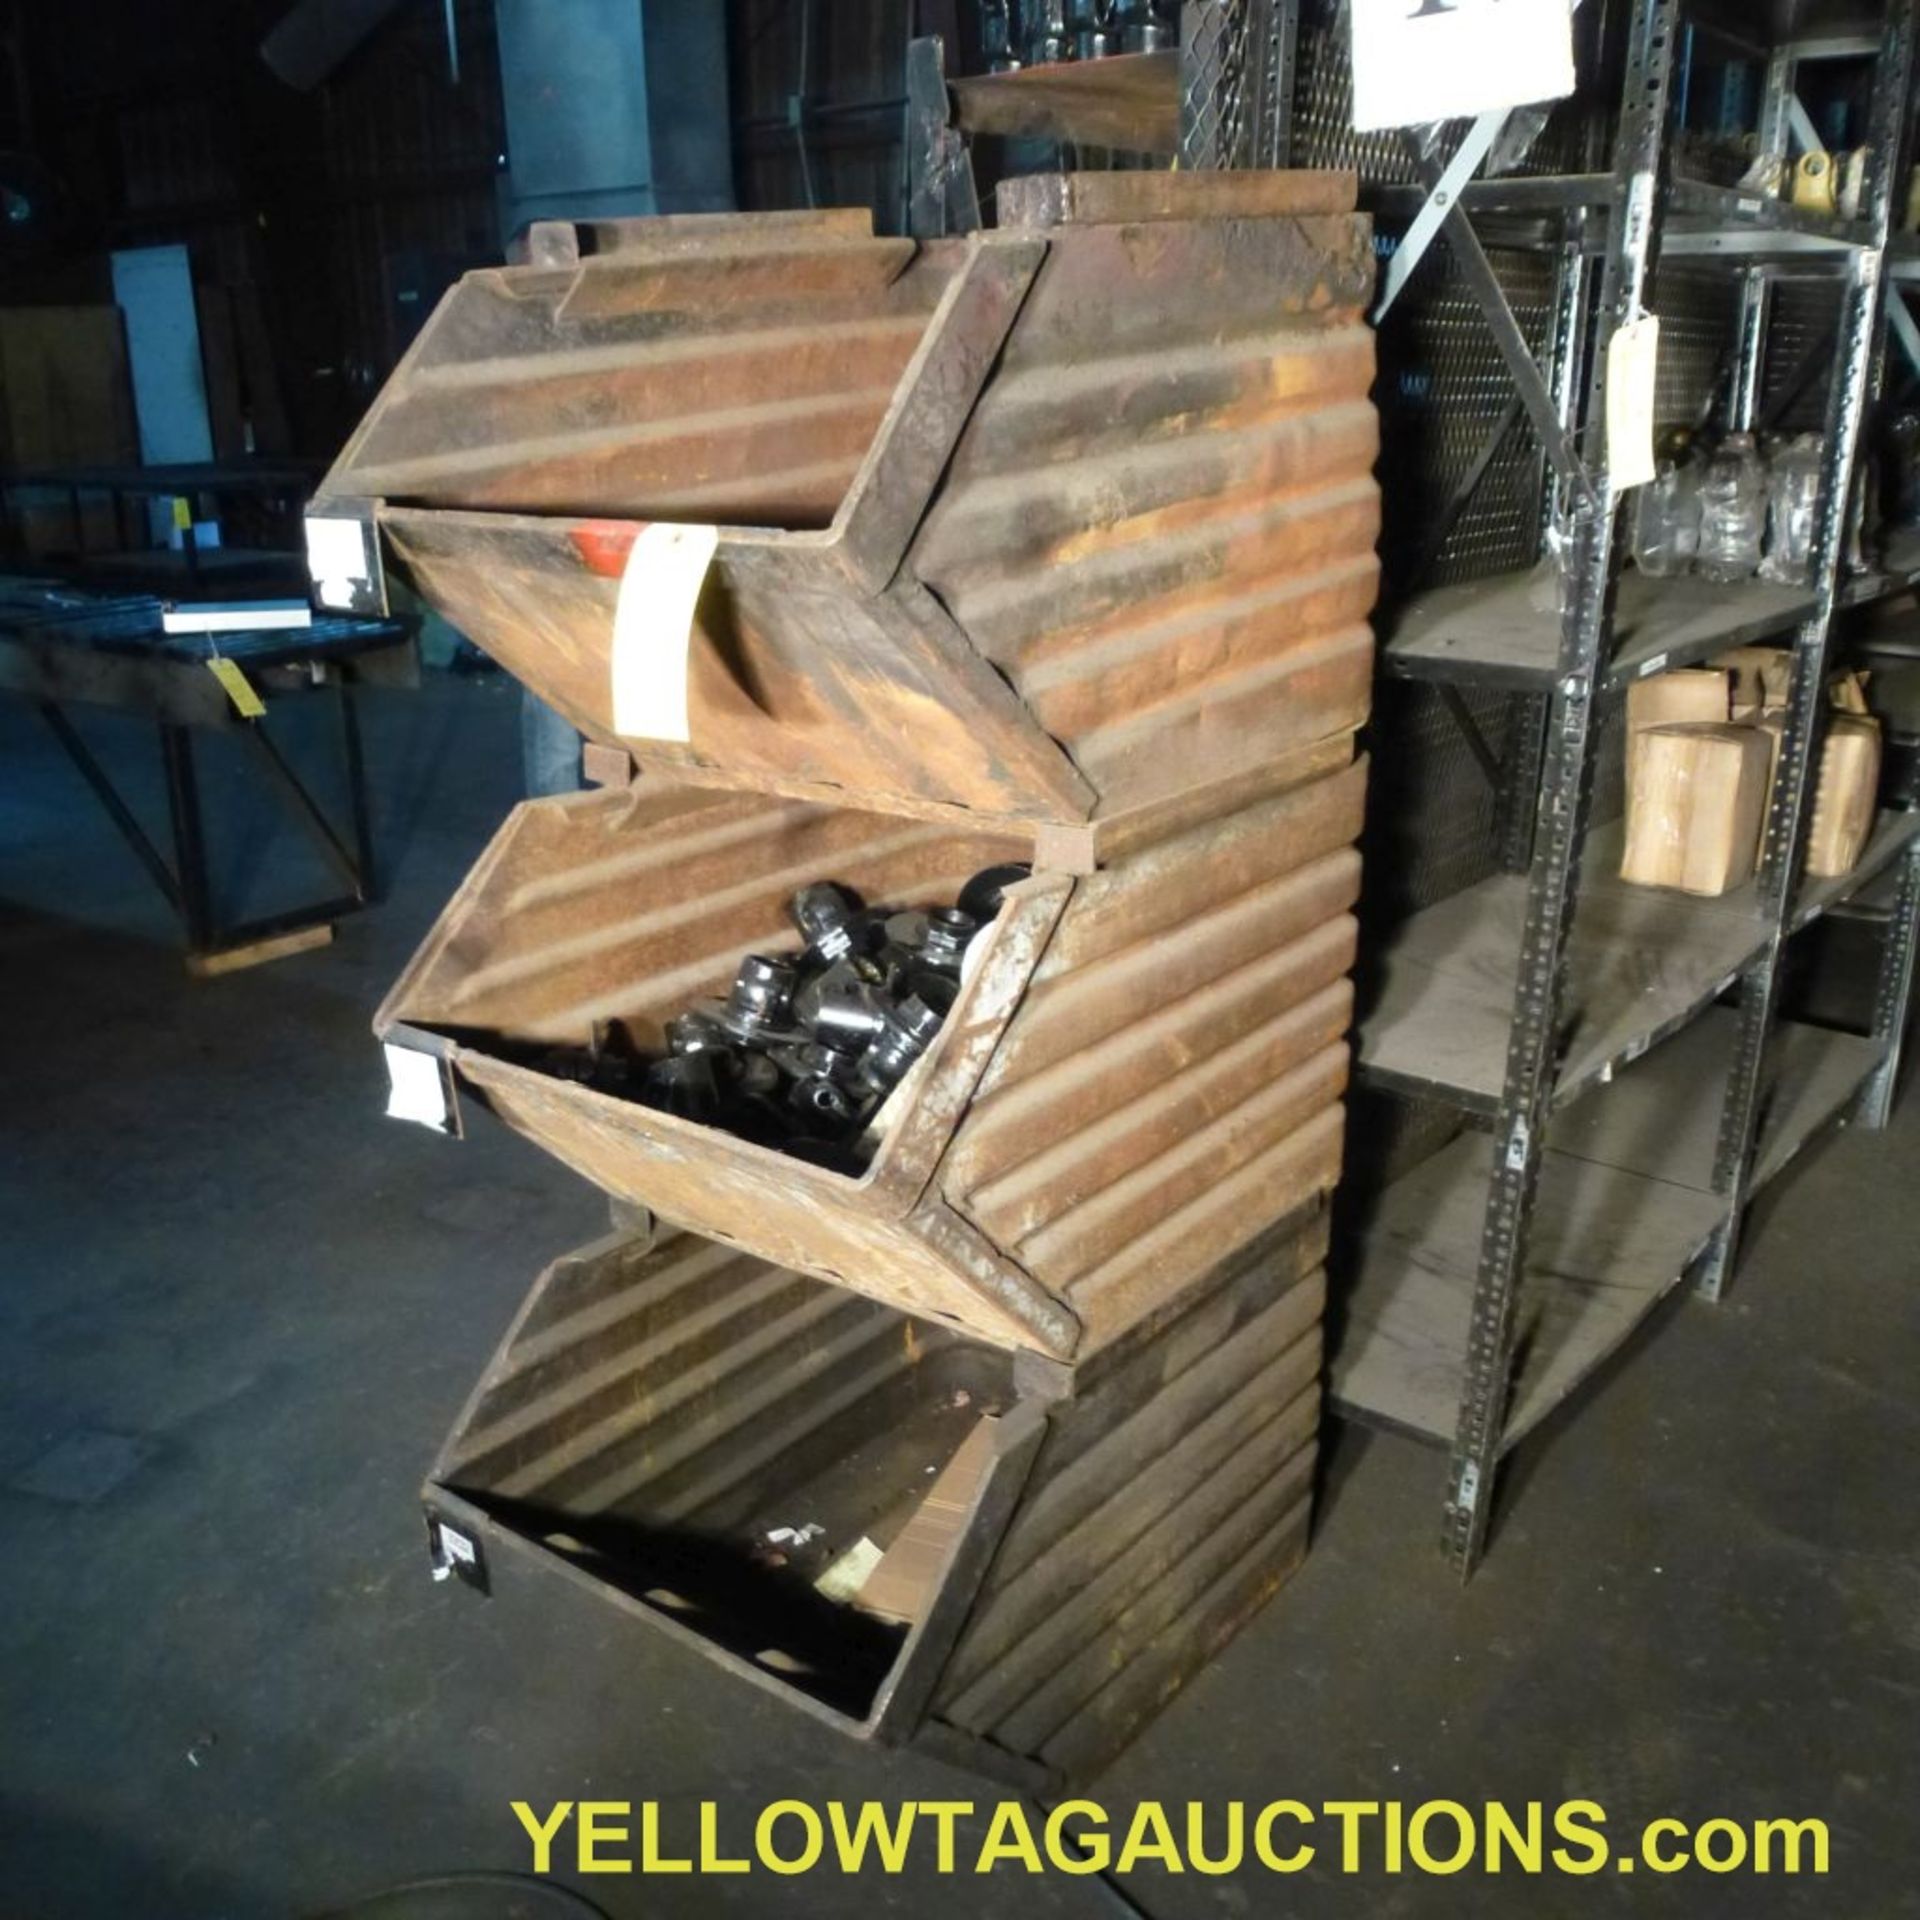 Lot of (62) Assorted Items|Approx. (60) Torque Limiter Housings; (3) Storage Bins, 36" x 24" x 20"|